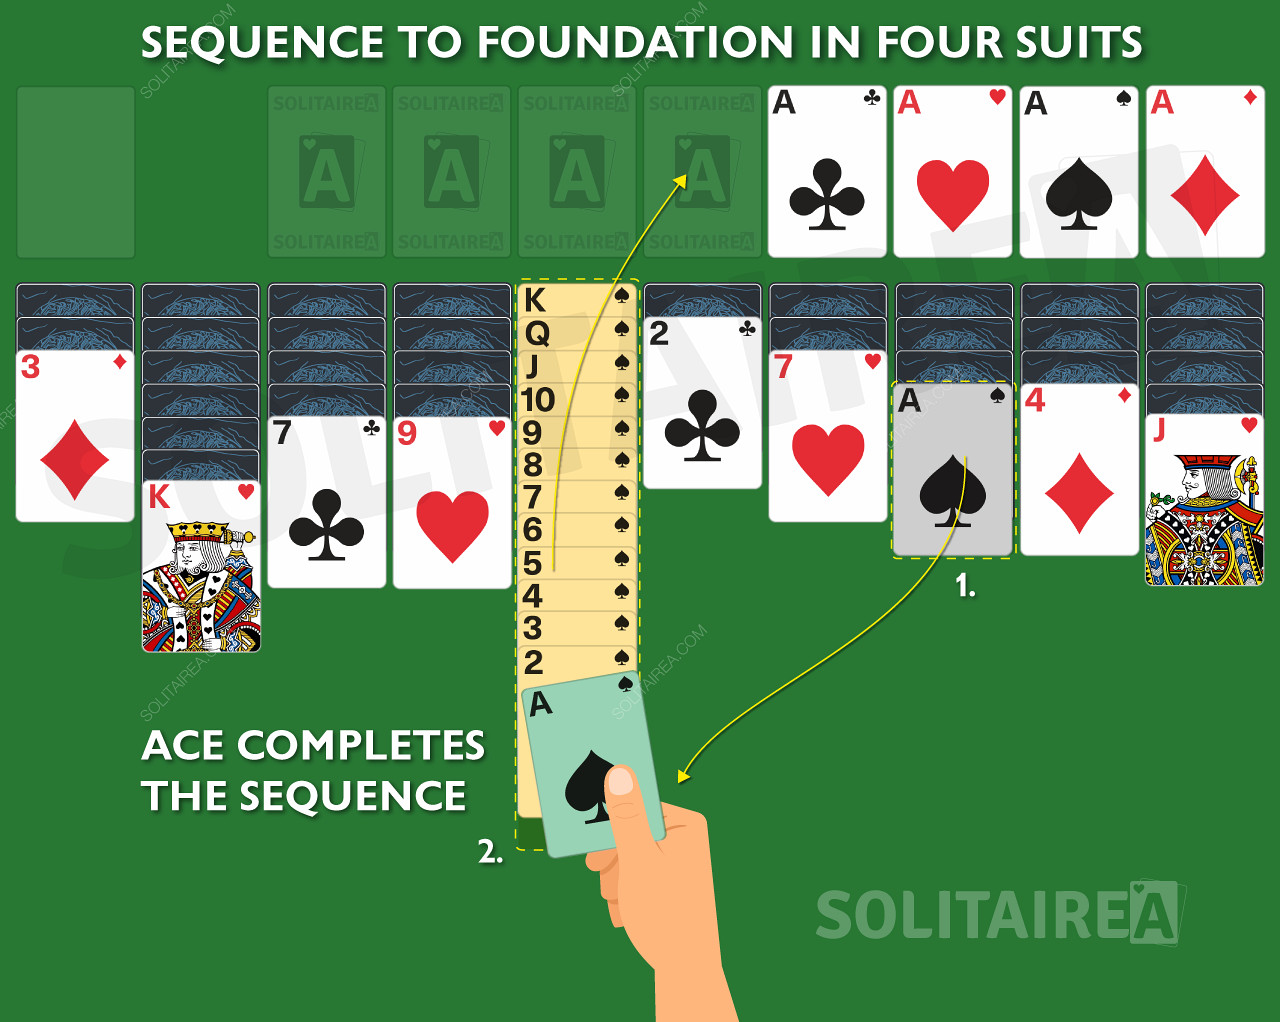 The Ace completes the sequence in the Spider Solitaire 4 Suits game